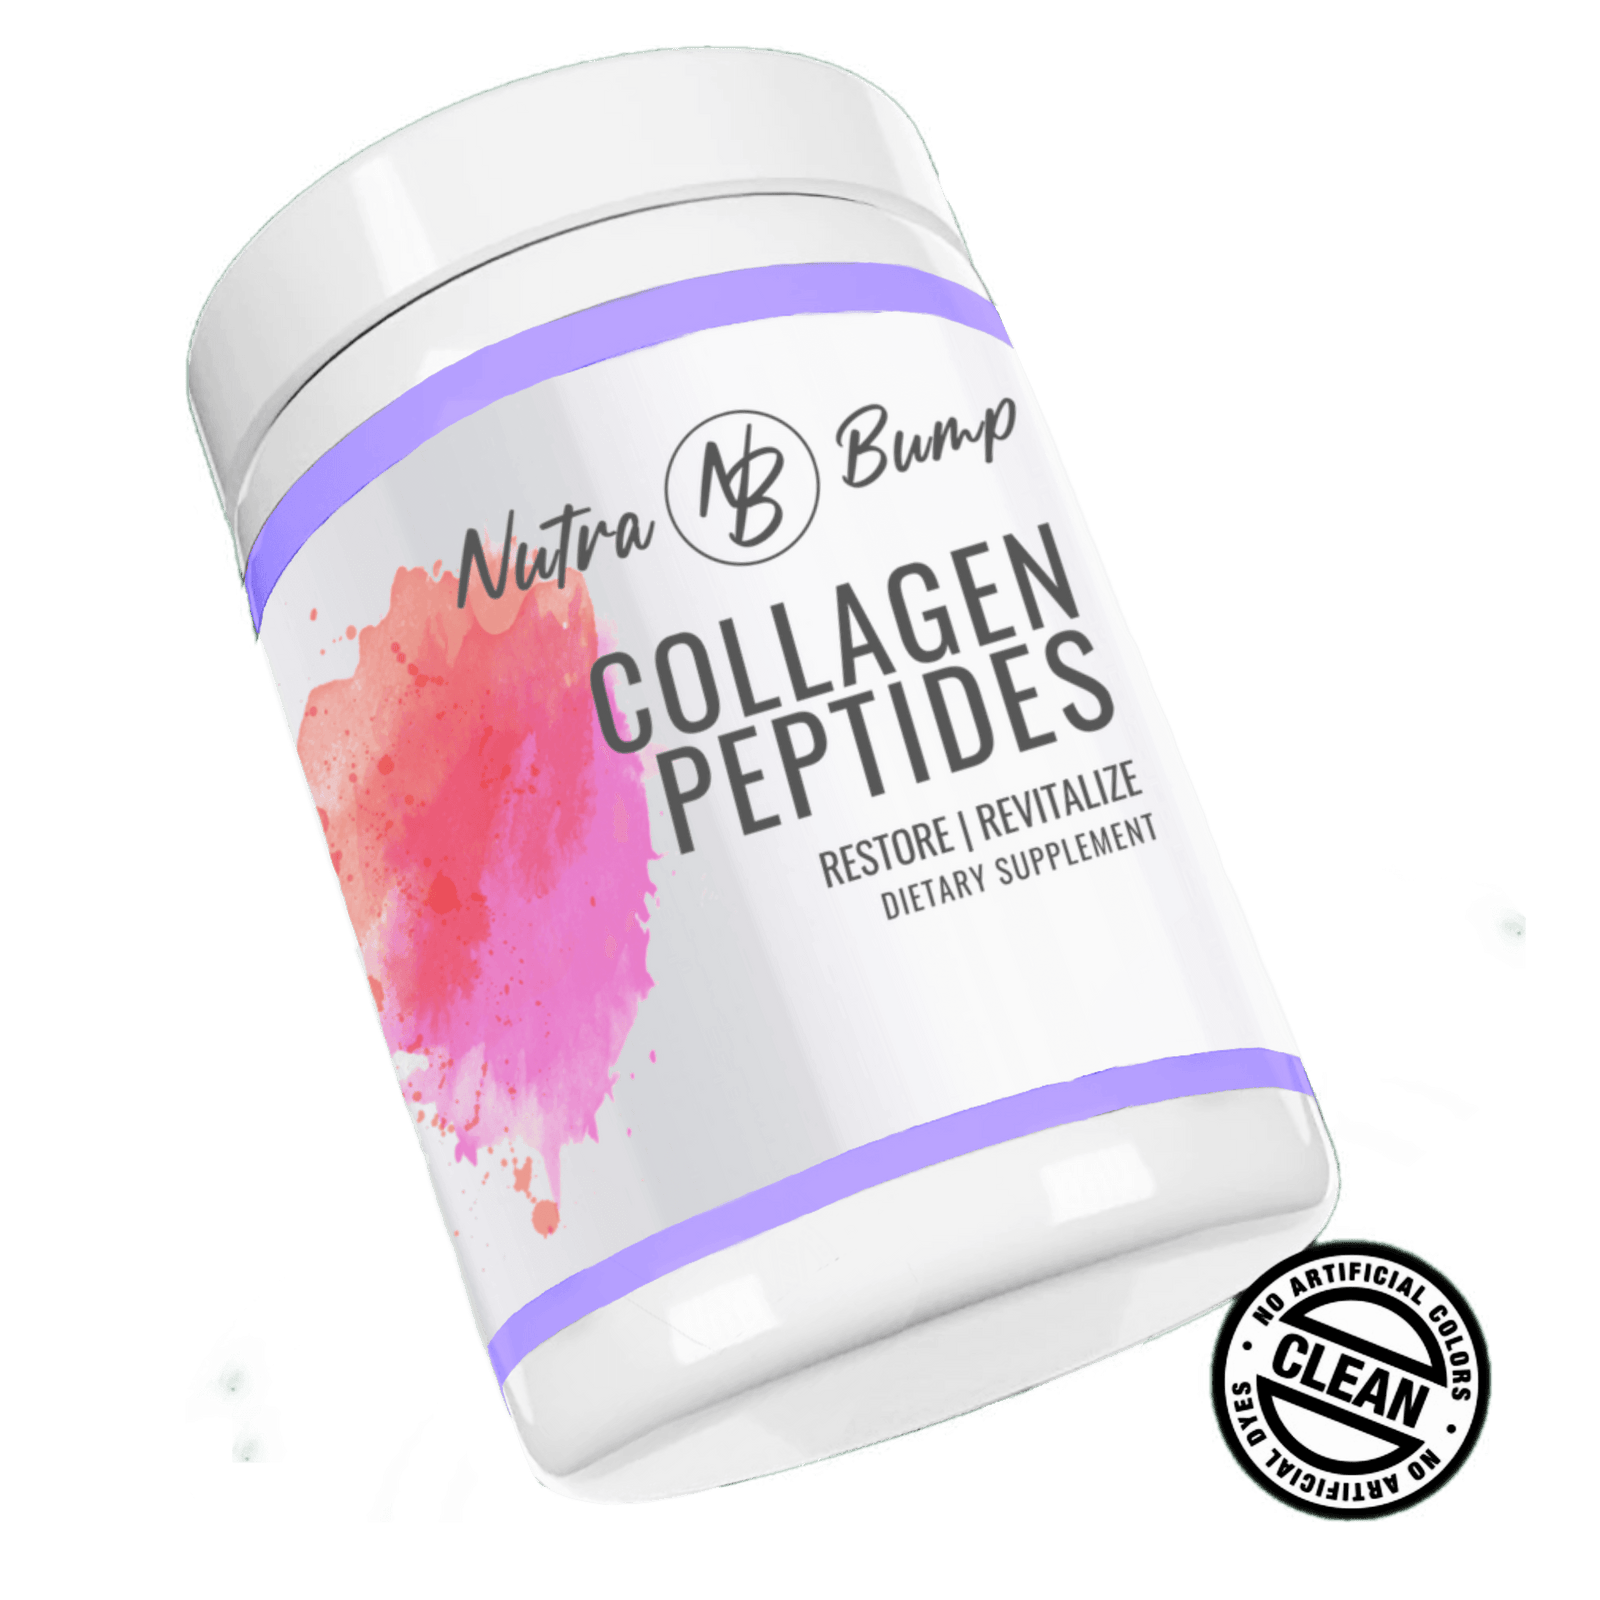 Collagen Protein: Safety And Benefits For Expecting And Nursing Mothers - NutraBump Nutrition breastfeeding health, bumped up, fit mom, nutrabump, pregnancy supplements, prenatal protein